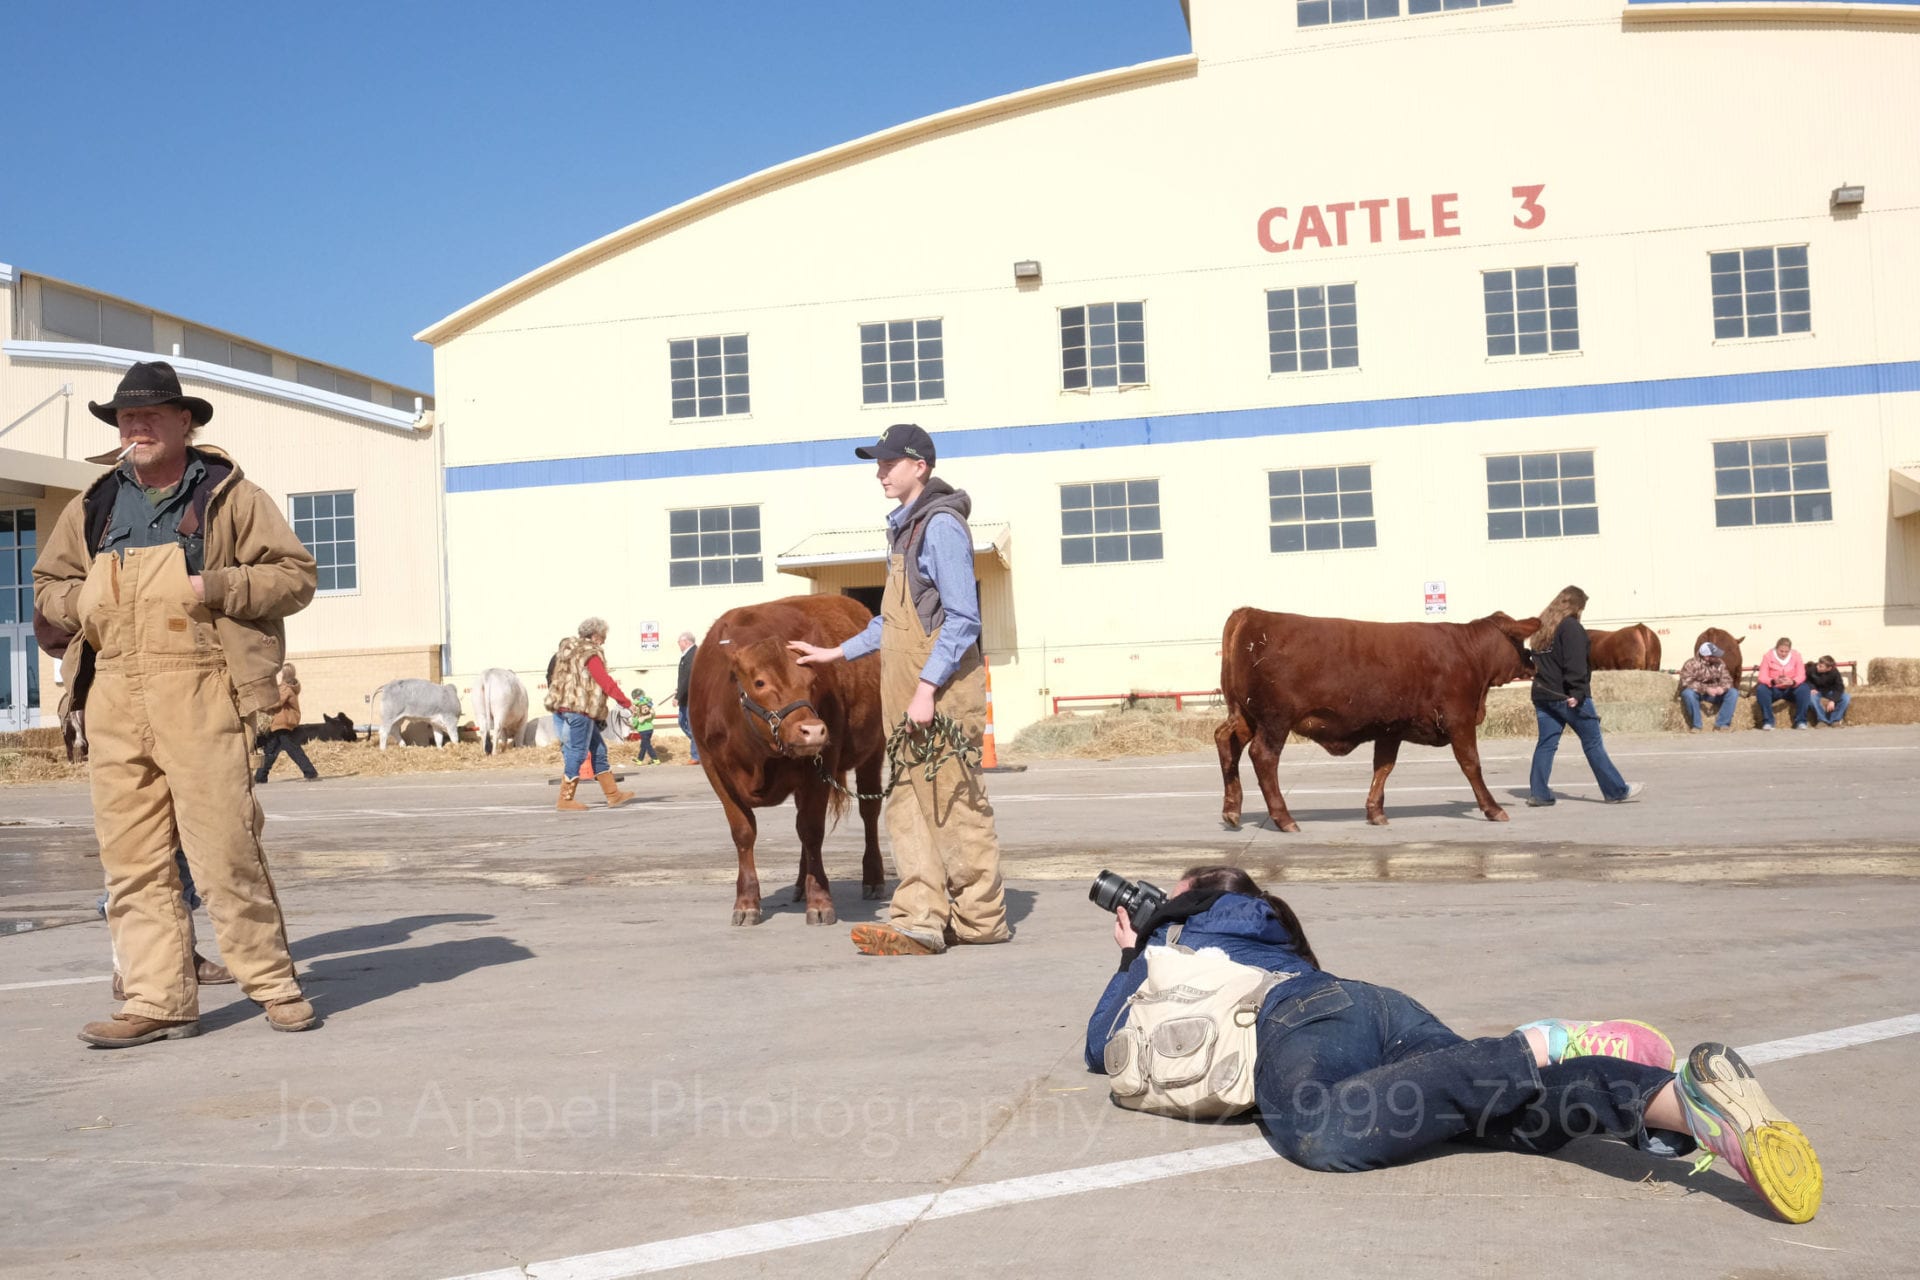 a photographer lays on the ground in a stockyard as farmers walk by leading their cattle